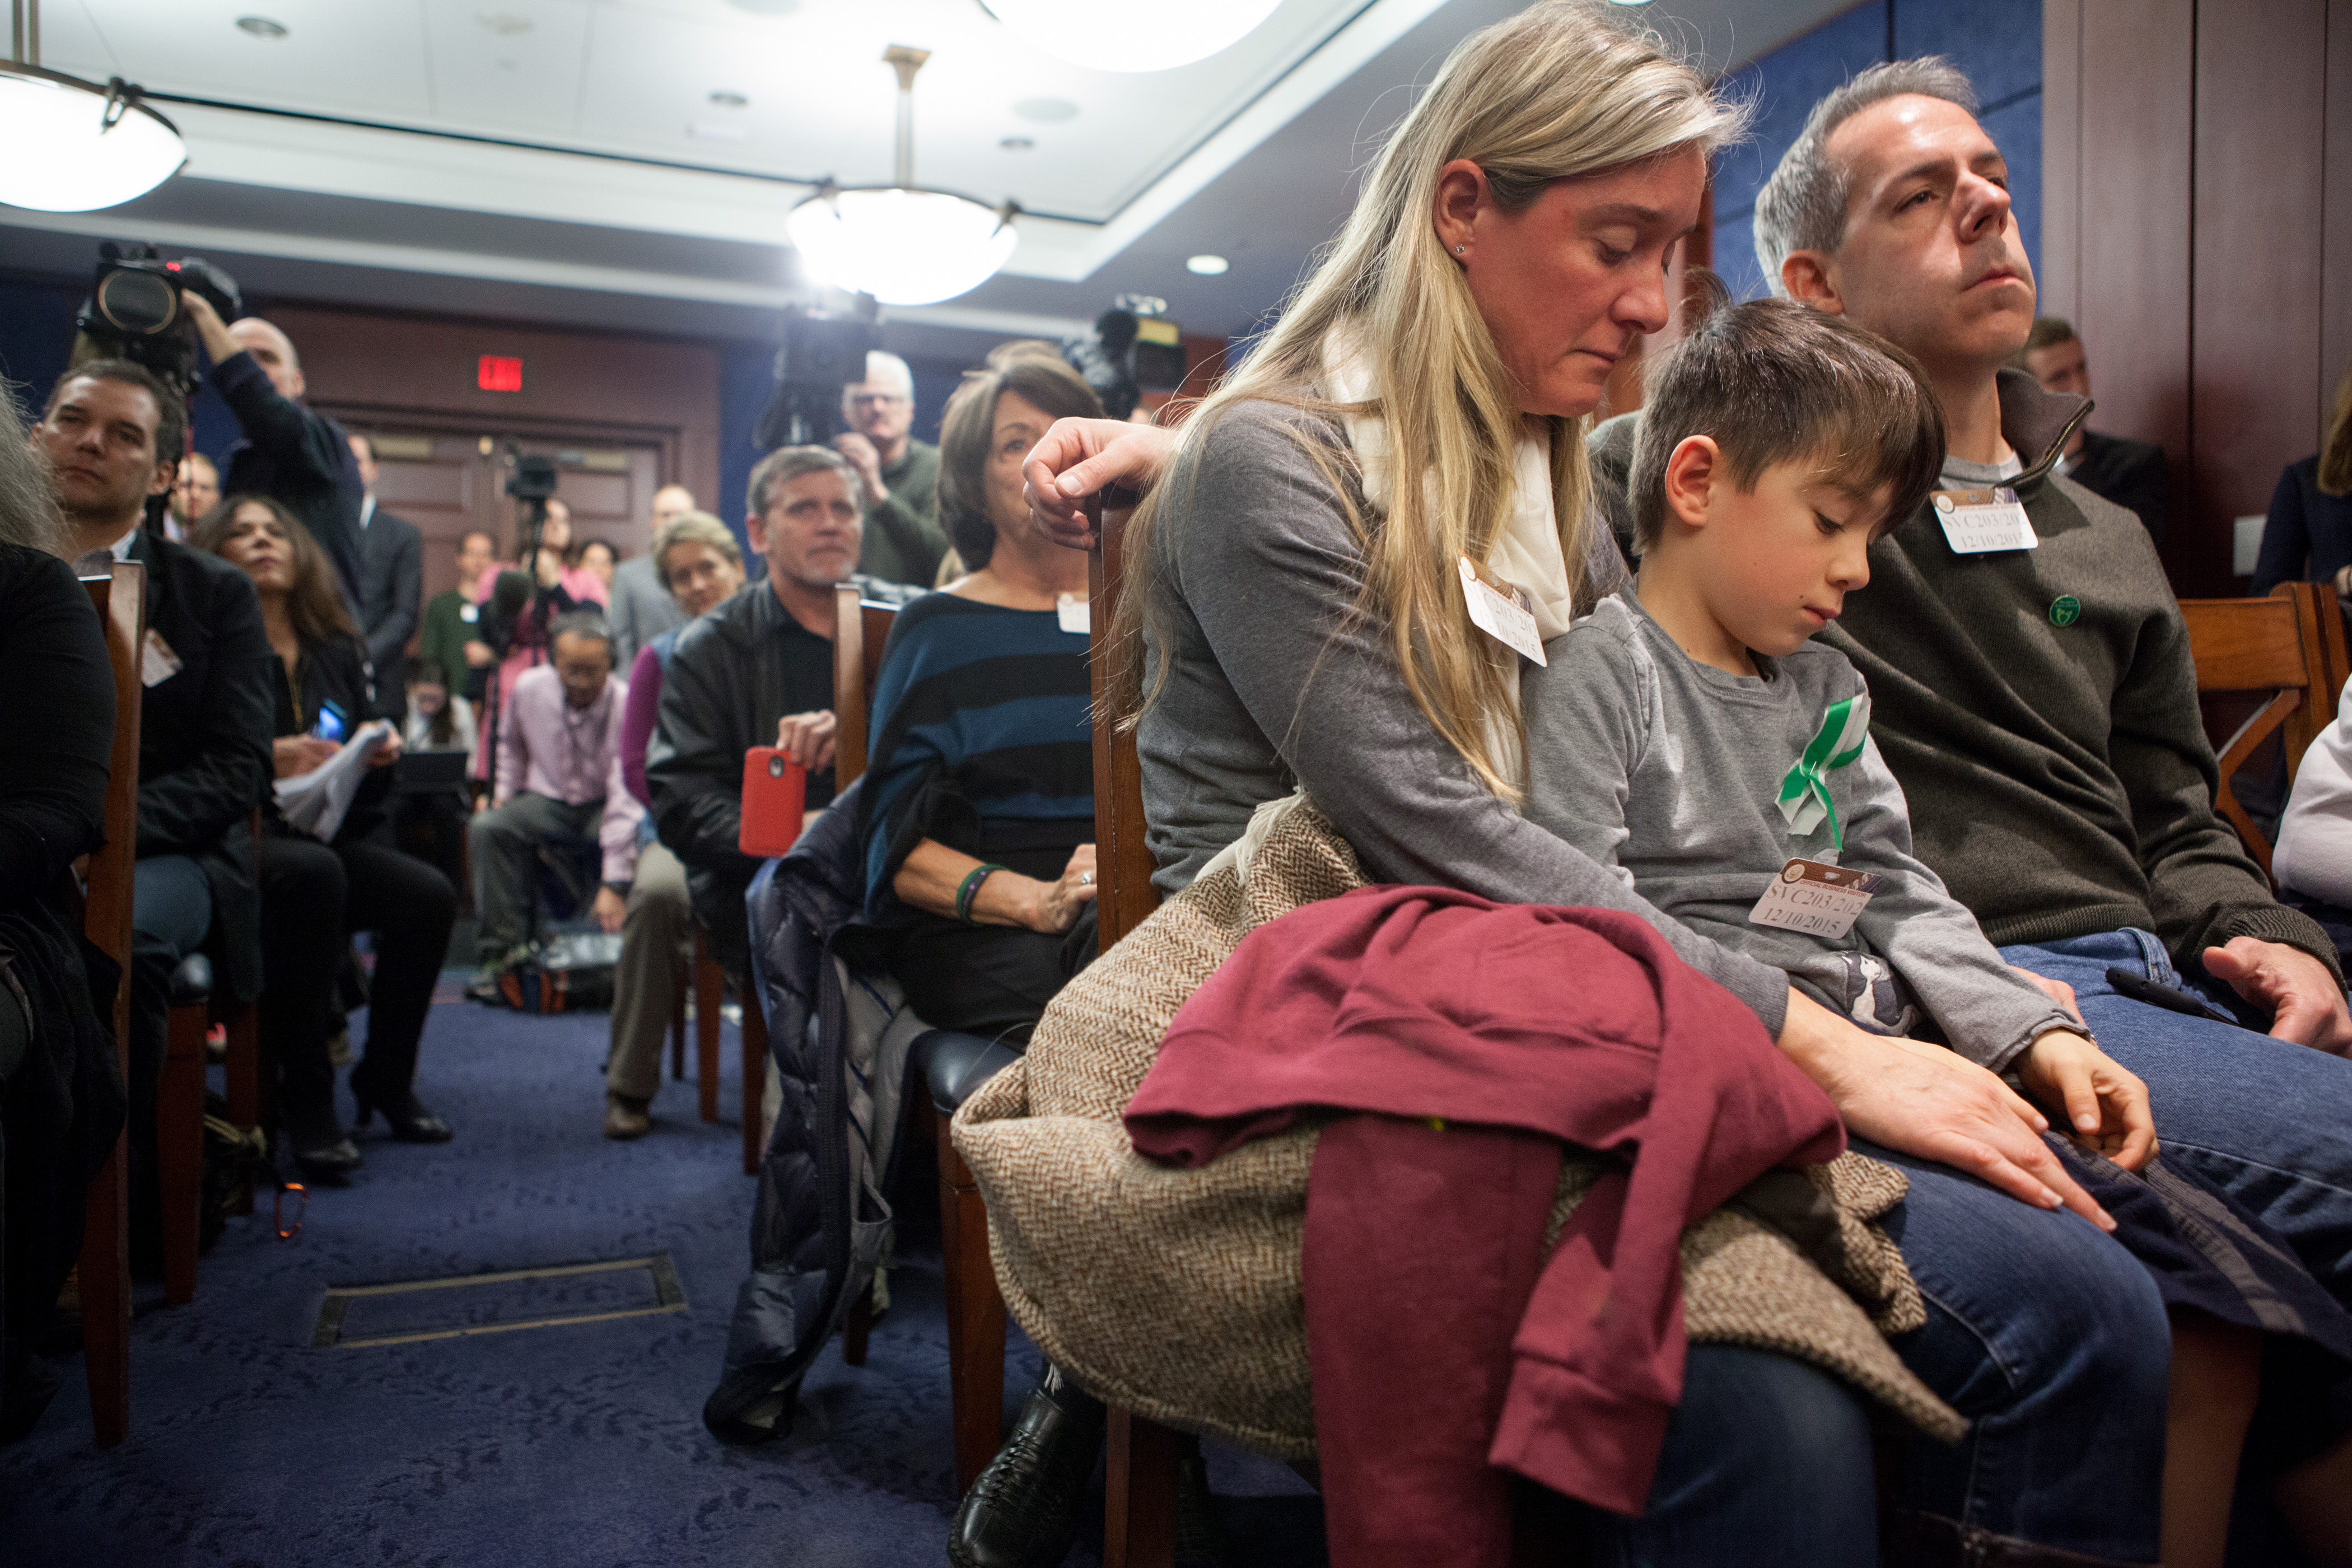 Rafe D'Agostino, 7, a second grader, sits between his parents Noelle and Paul D'Agostino during a press conference on Capitol Hill on Dec. 10. ((Photo by Allison Shelley/Getty Images))